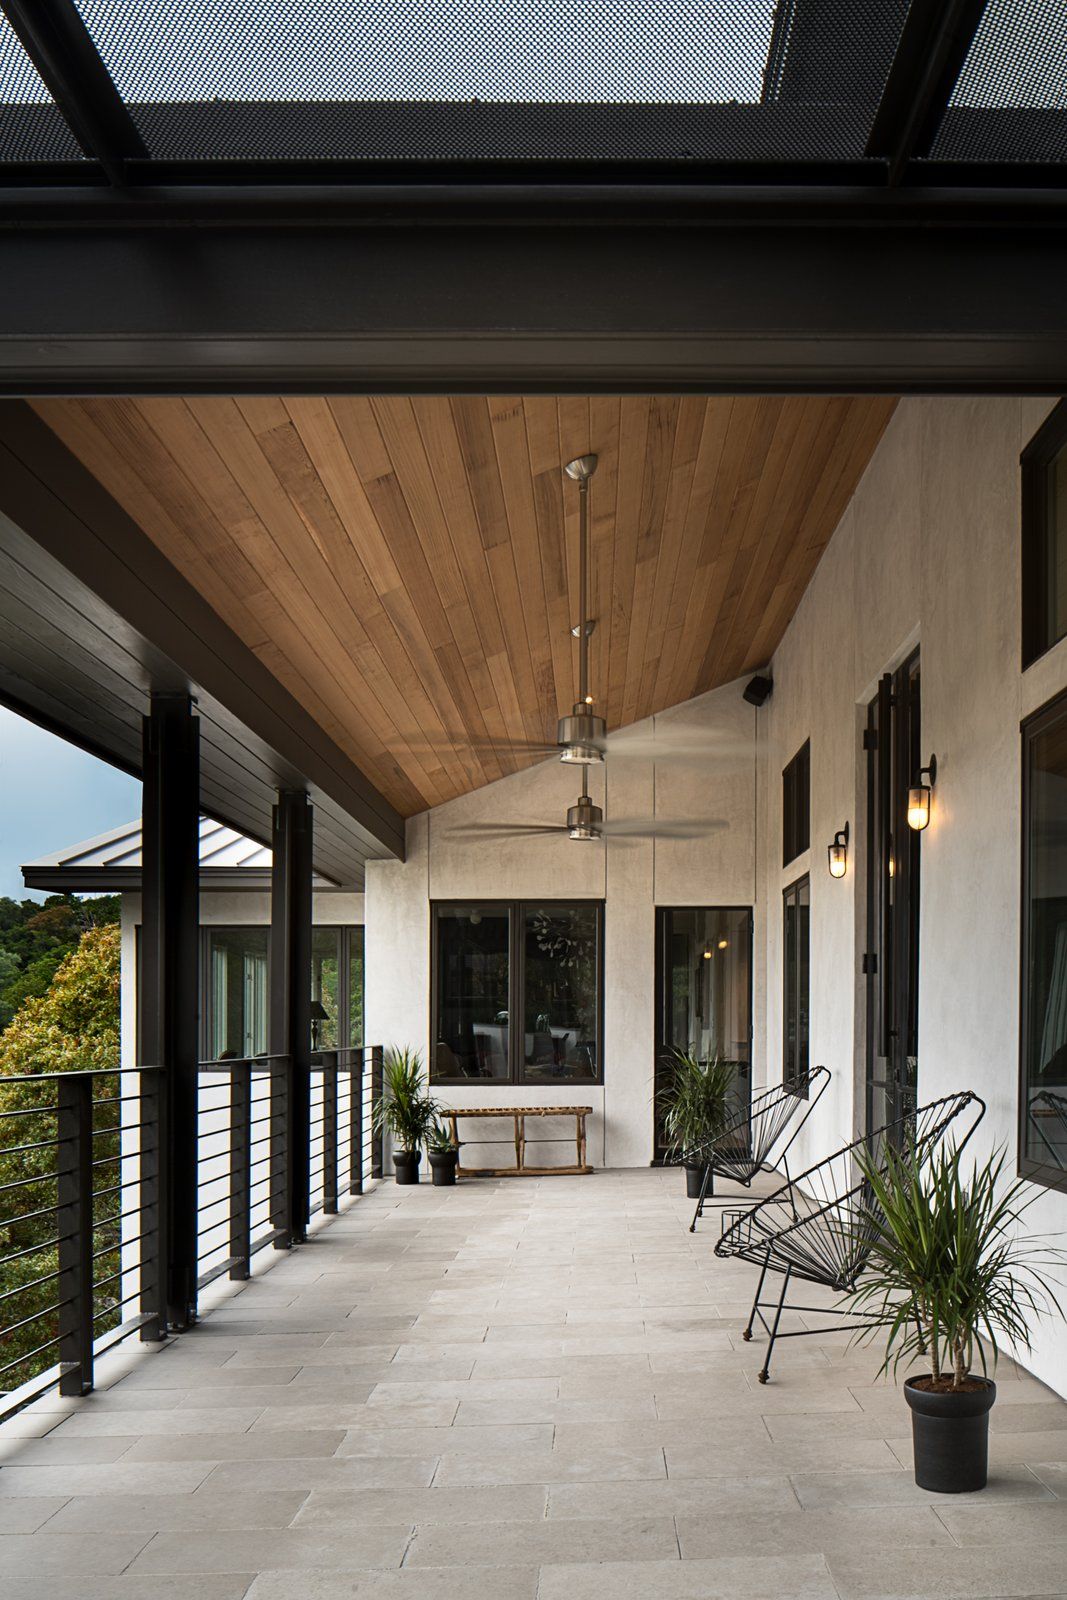 Elegant Roofed Outdoor Spaces: The Beauty of Covered Decks